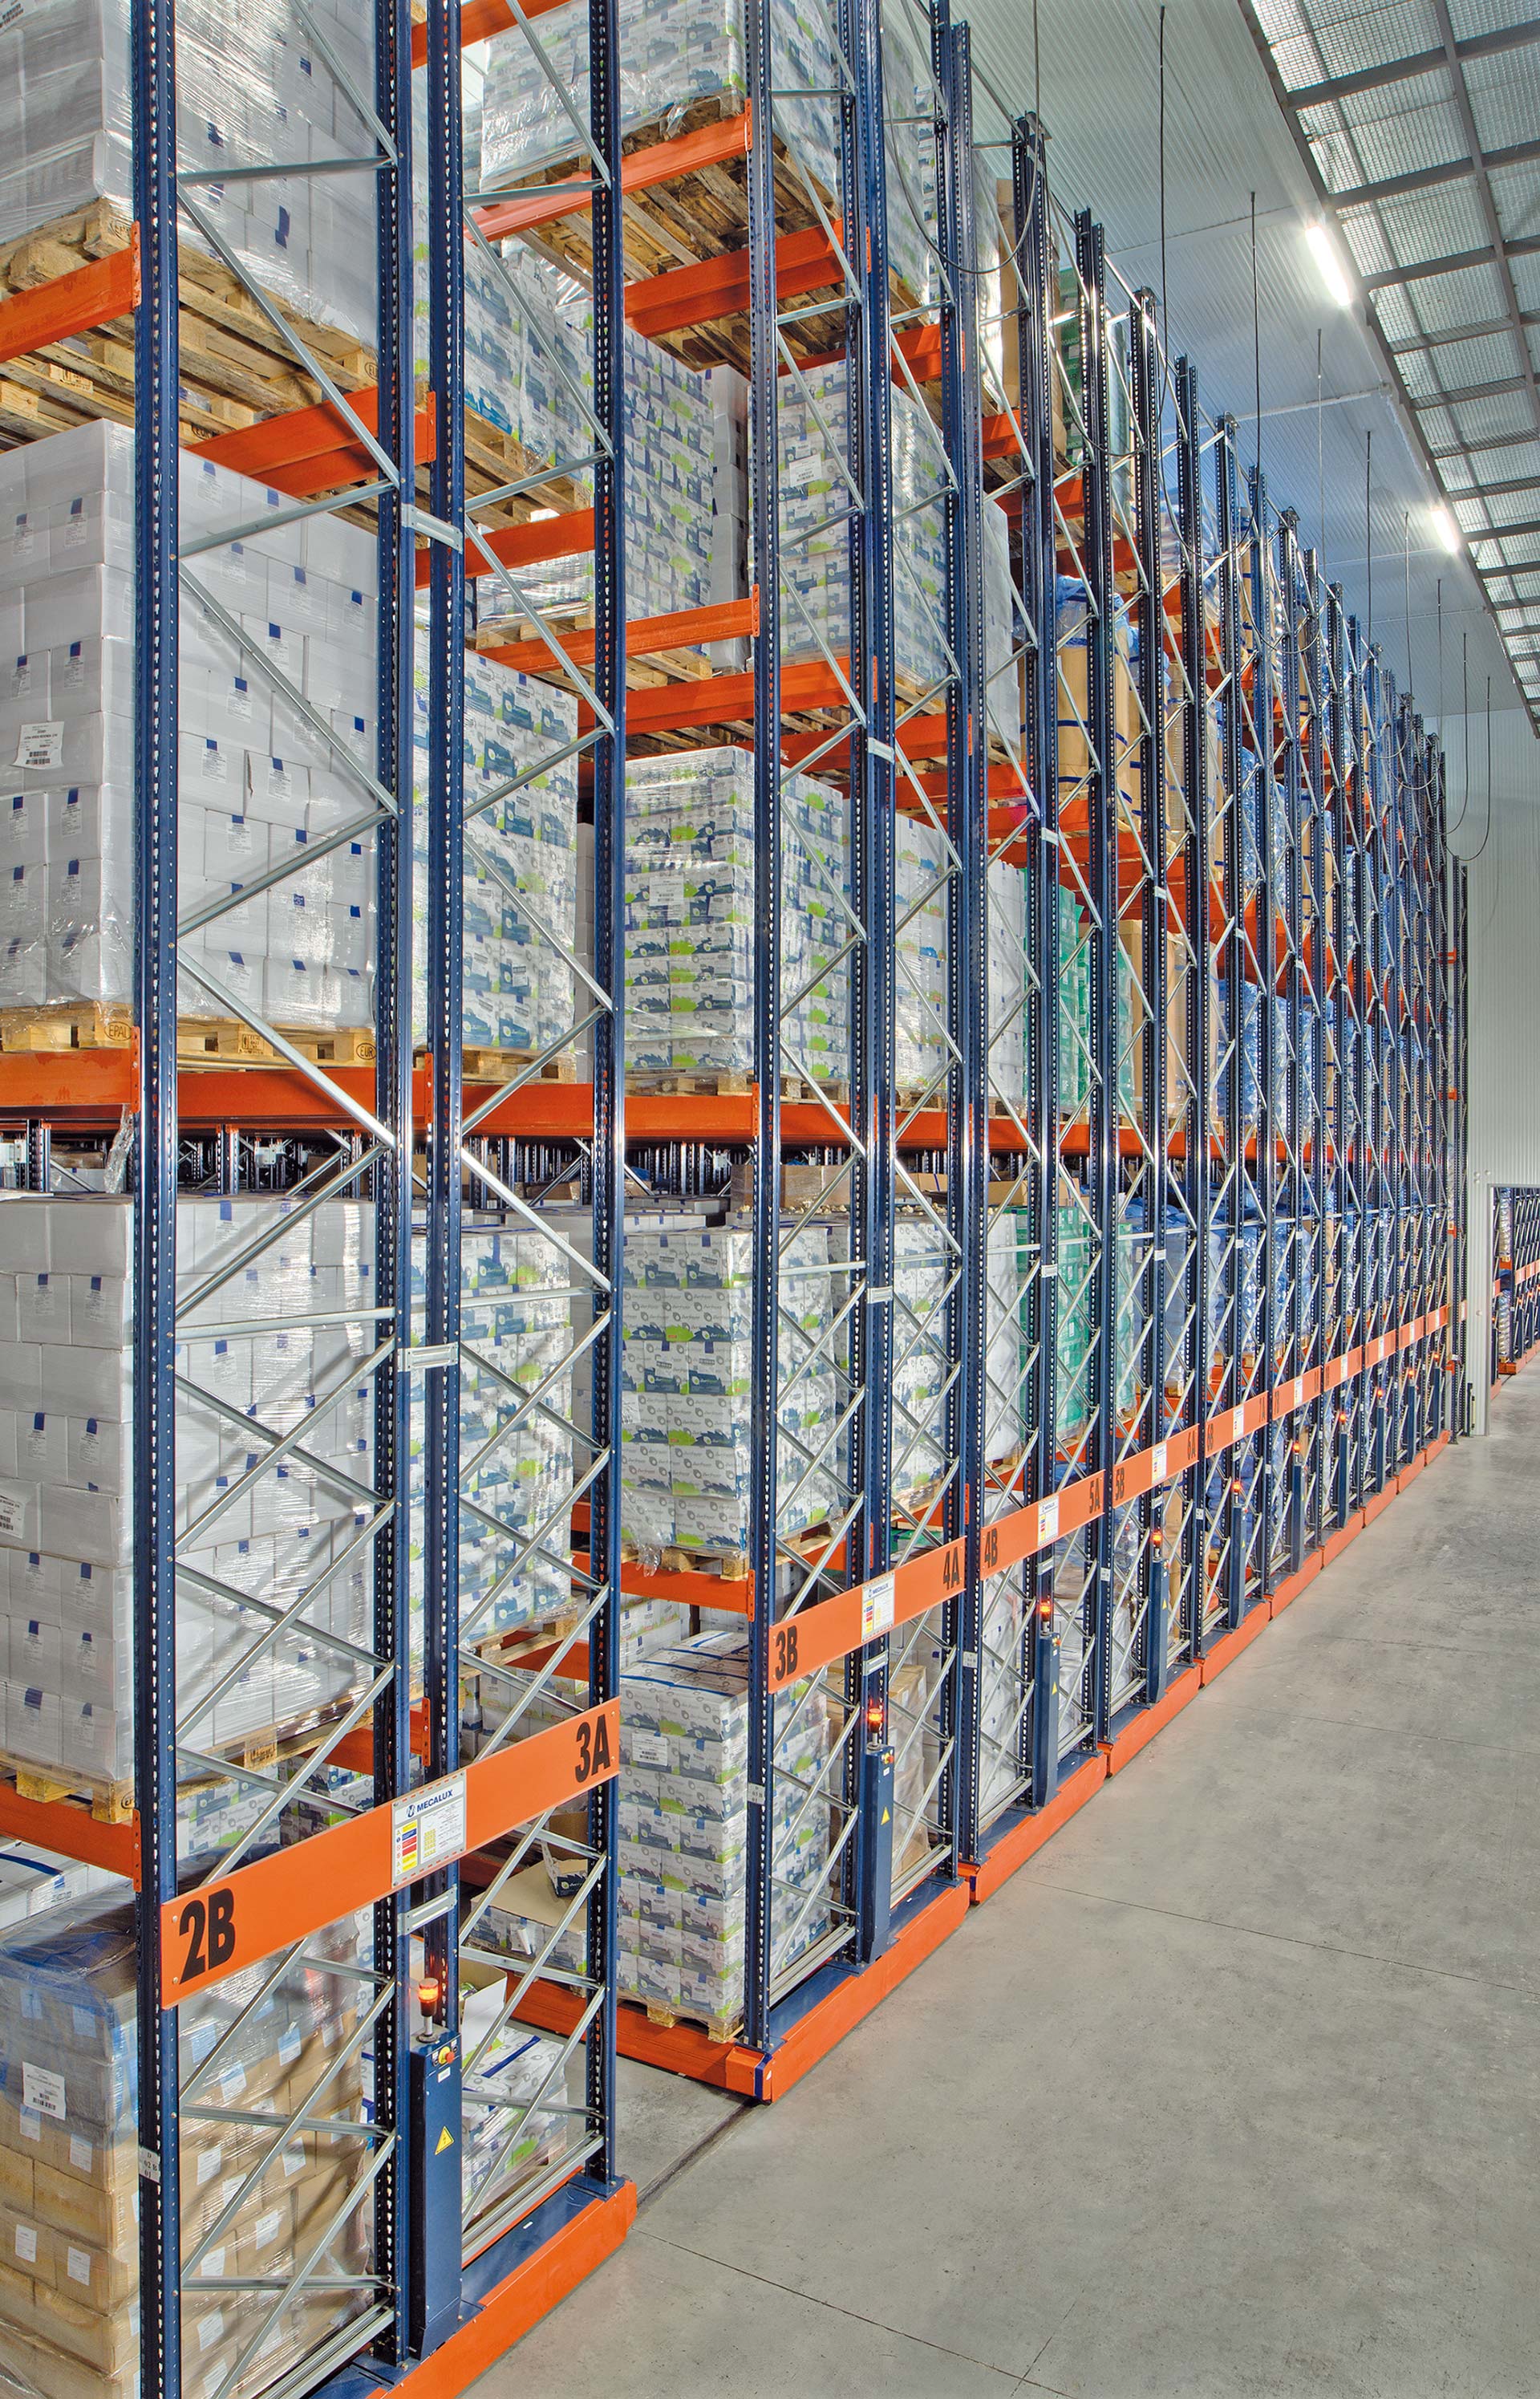 This system can be adapted to warehouses with more levels to optimise the load capacity